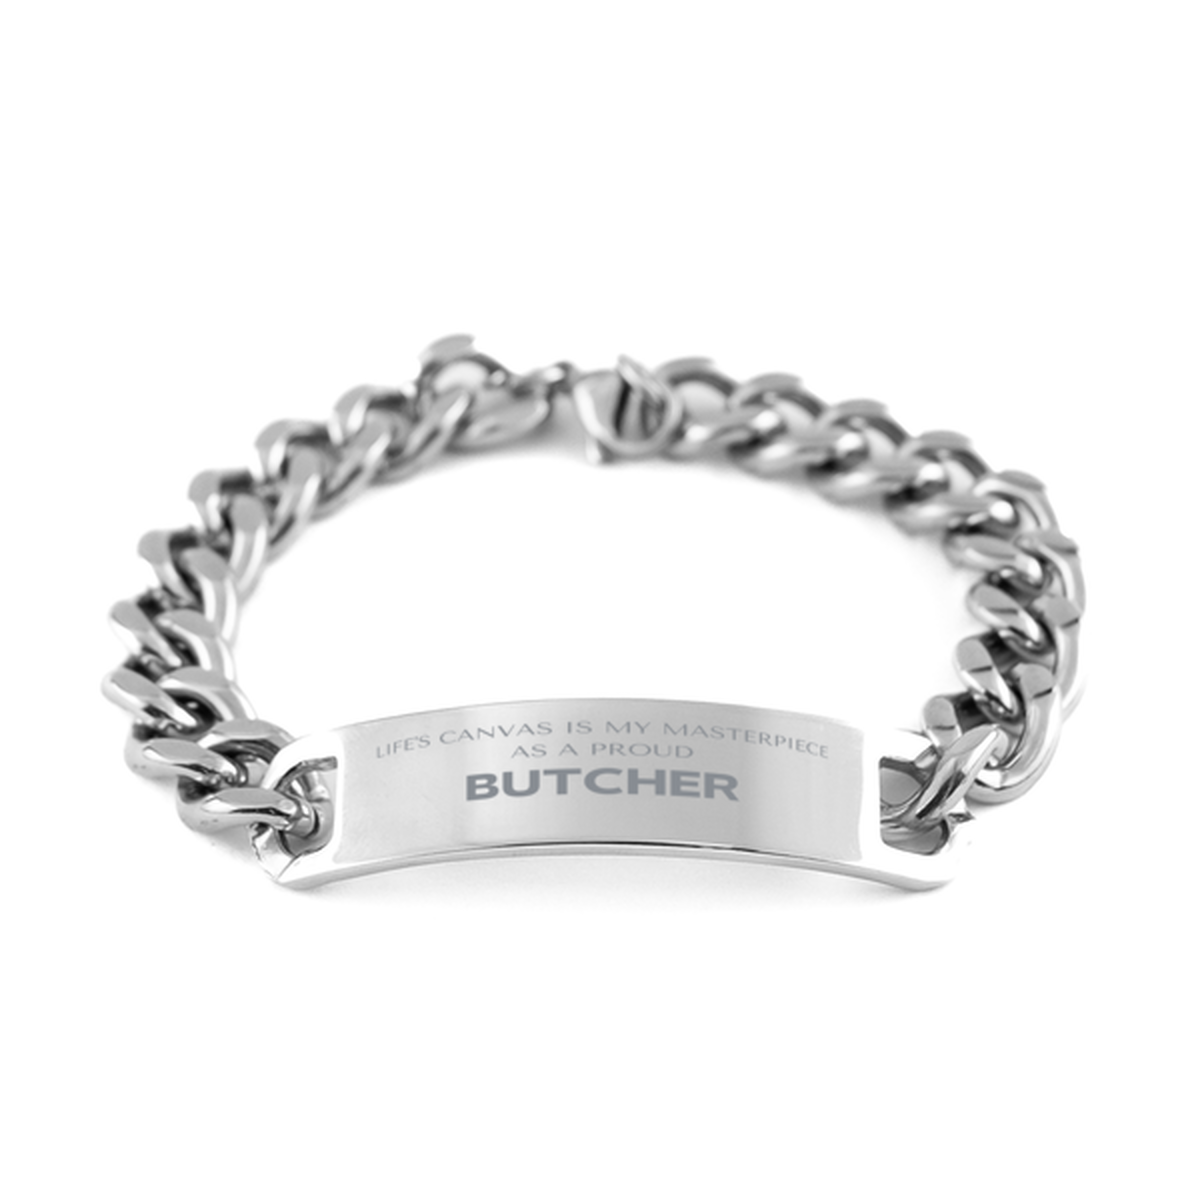 Proud Butcher Gifts, Life's canvas is my masterpiece, Epic Birthday Christmas Unique Cuban Chain Stainless Steel Bracelet For Butcher, Coworkers, Men, Women, Friends